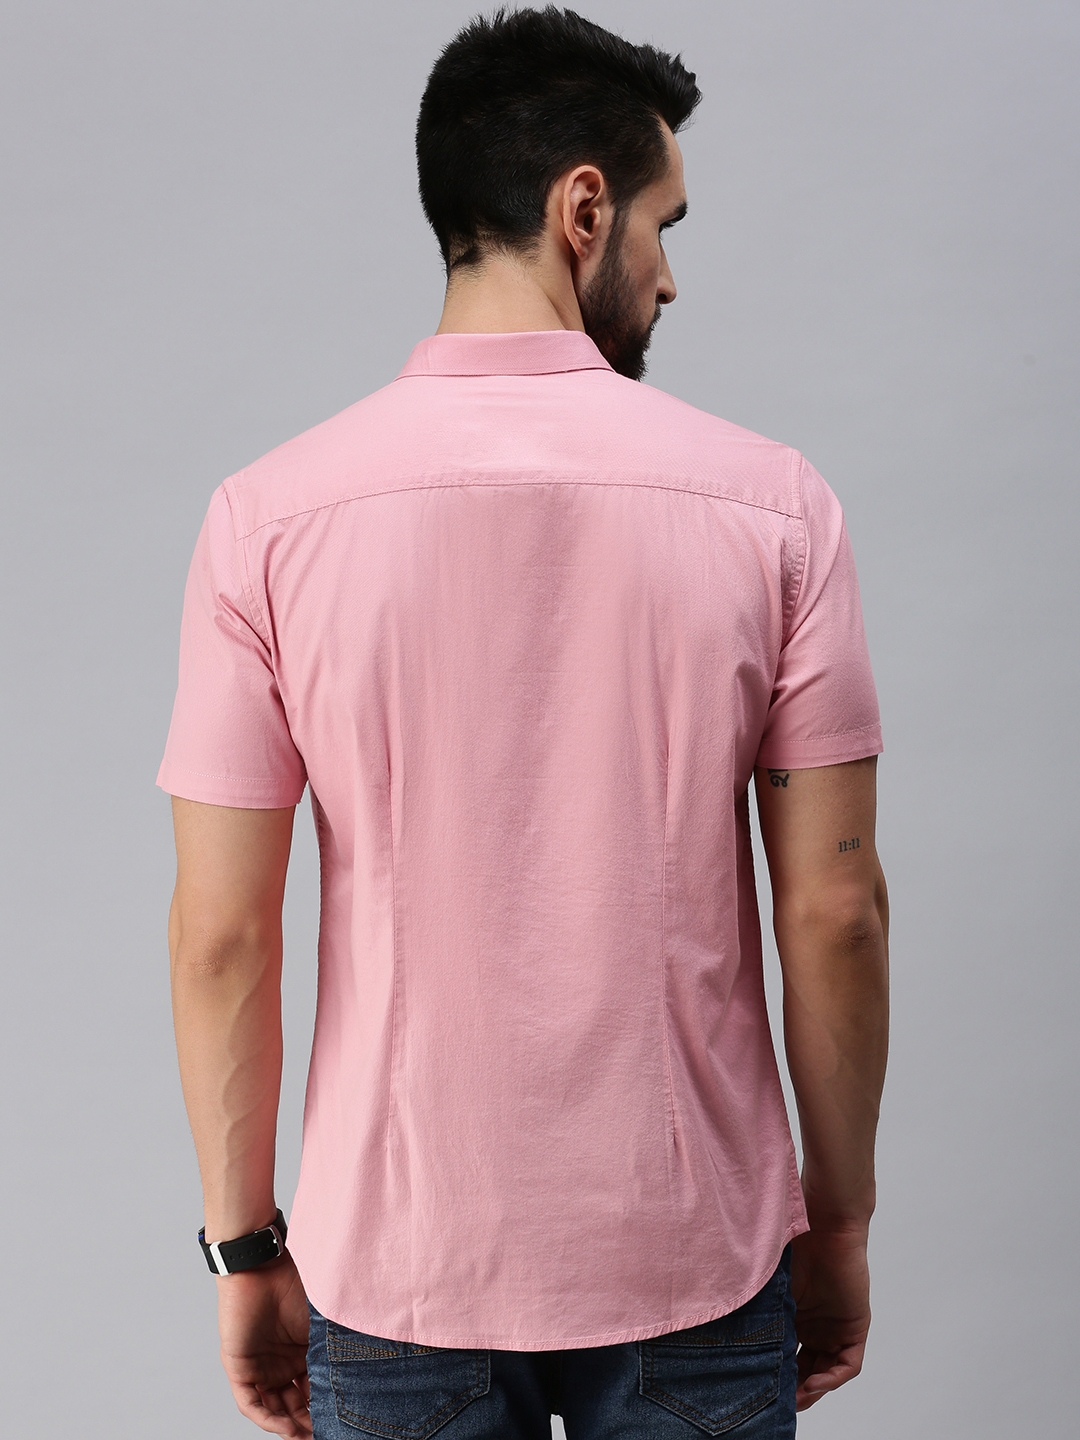 Men's Pink Polycotton Solid Casual Shirts